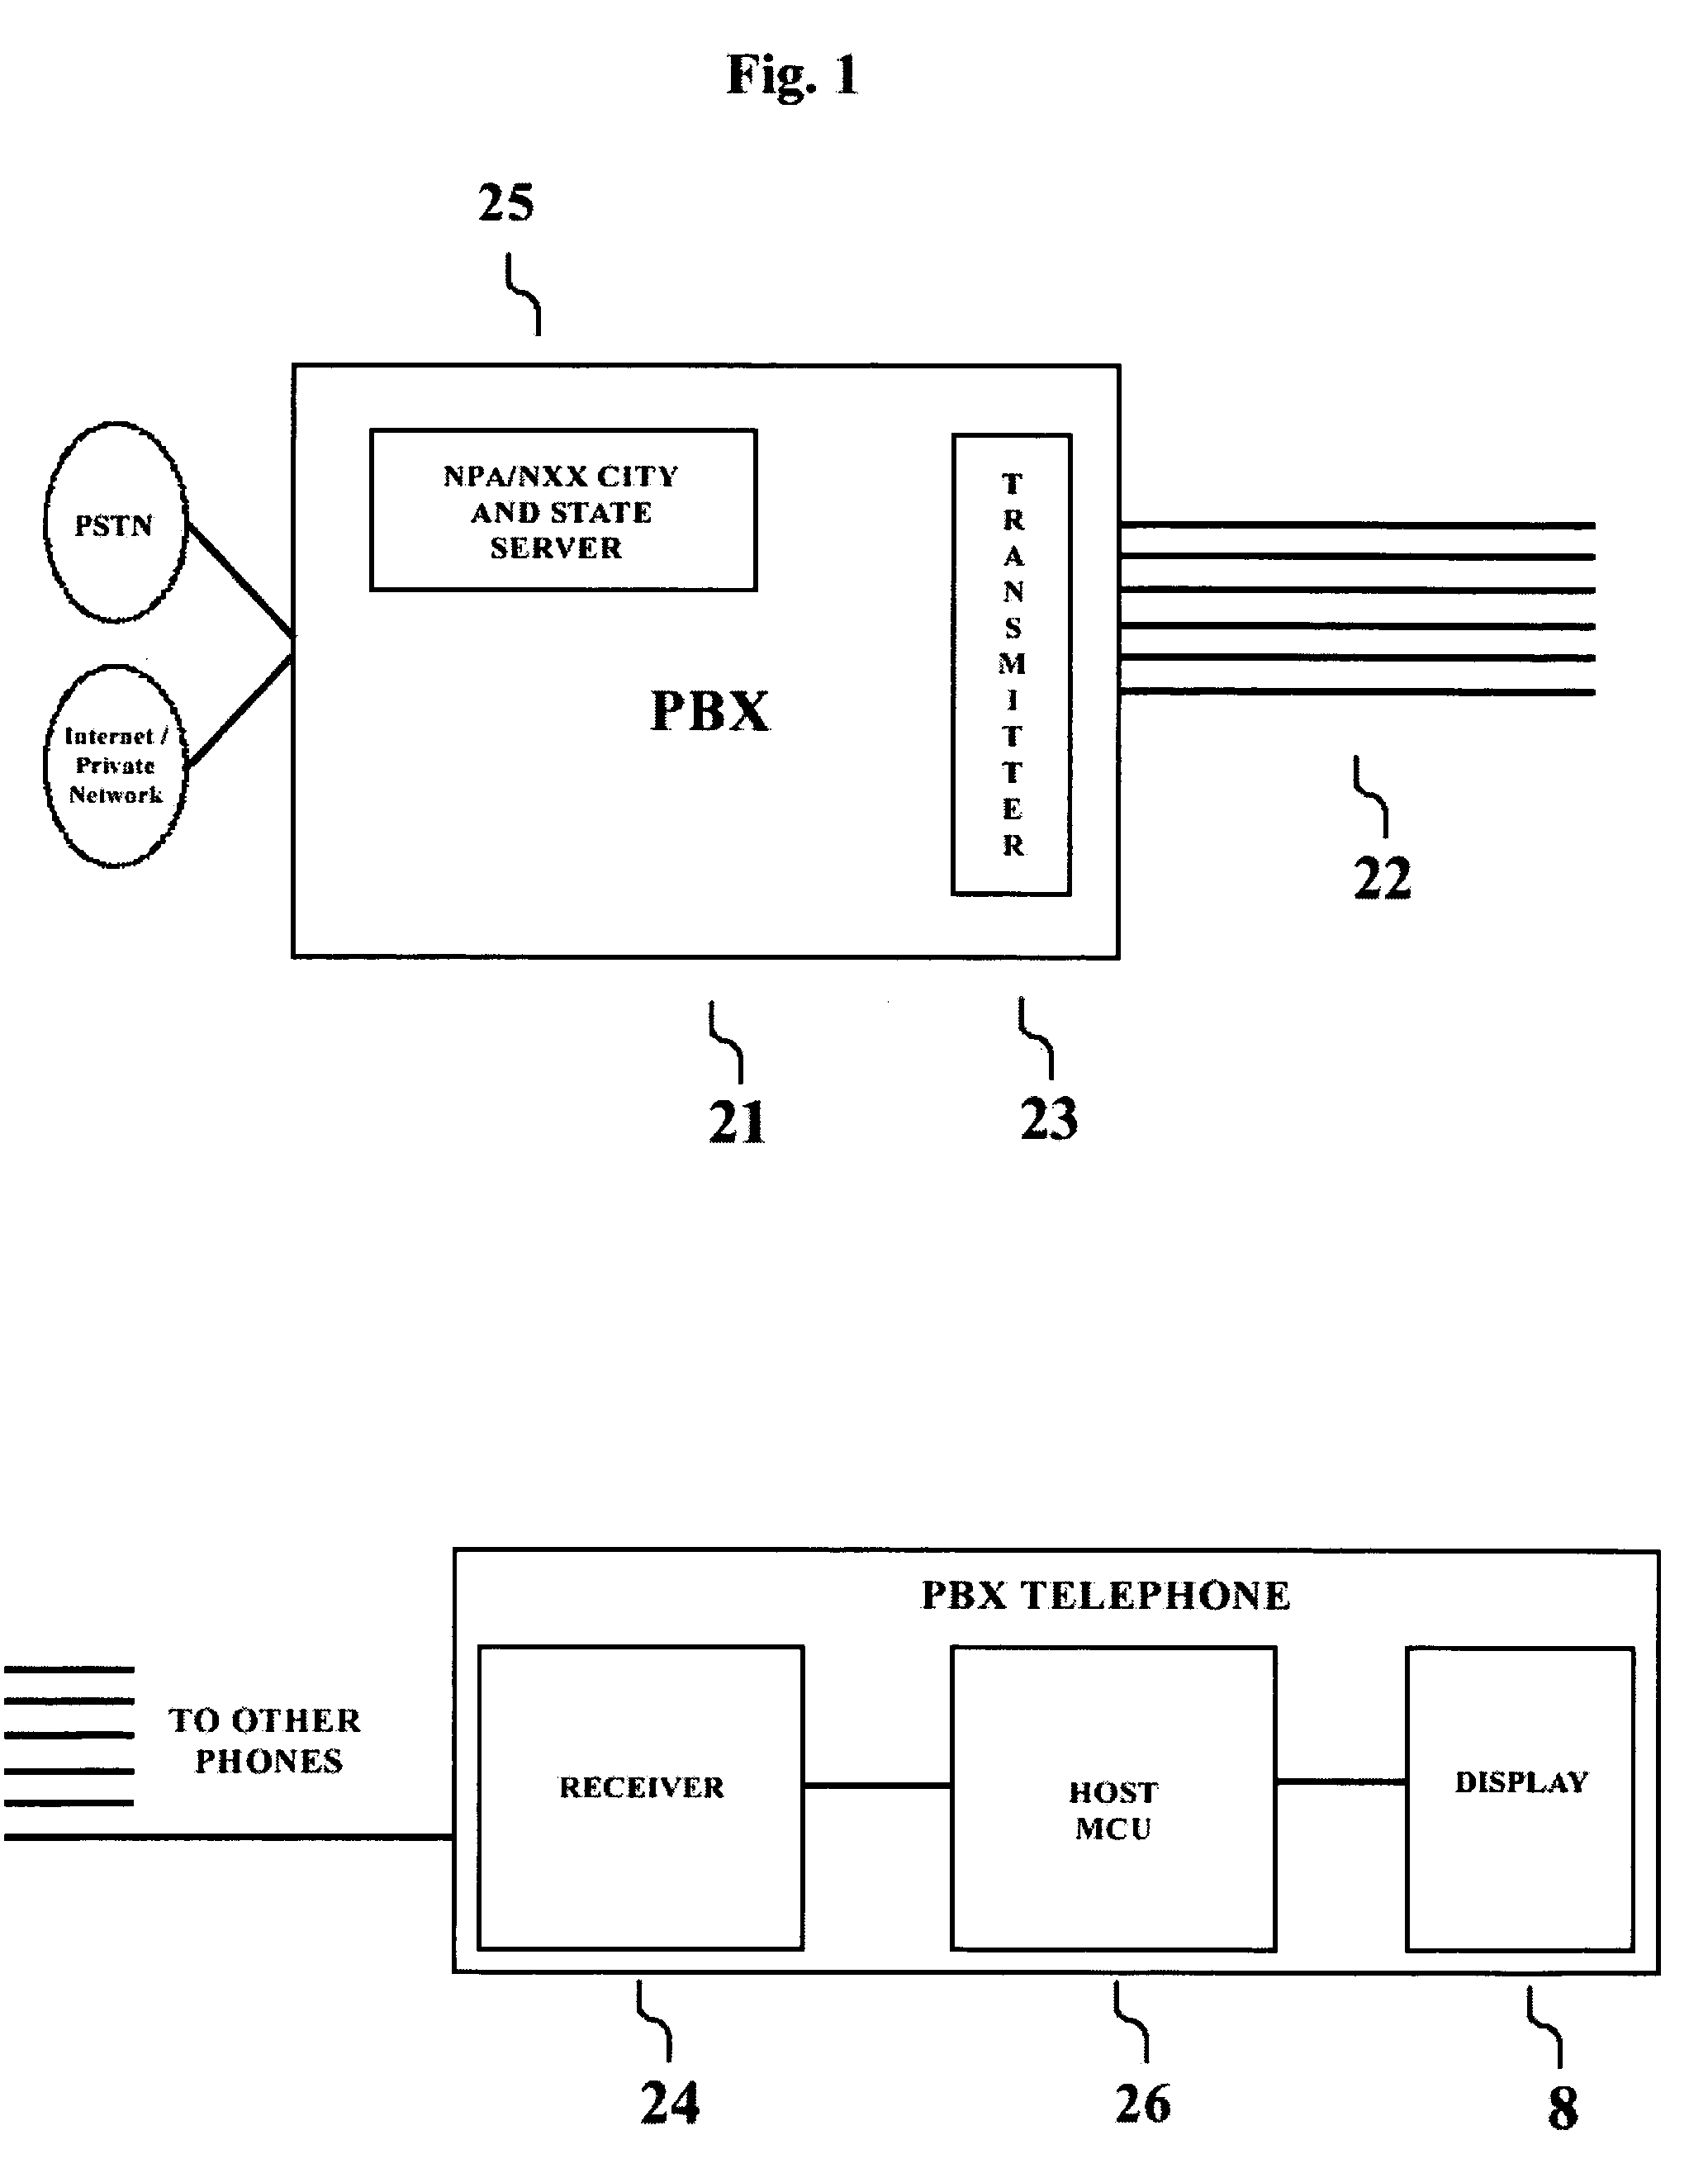 Method for advanced determination and display of caller geographic information in a PBX